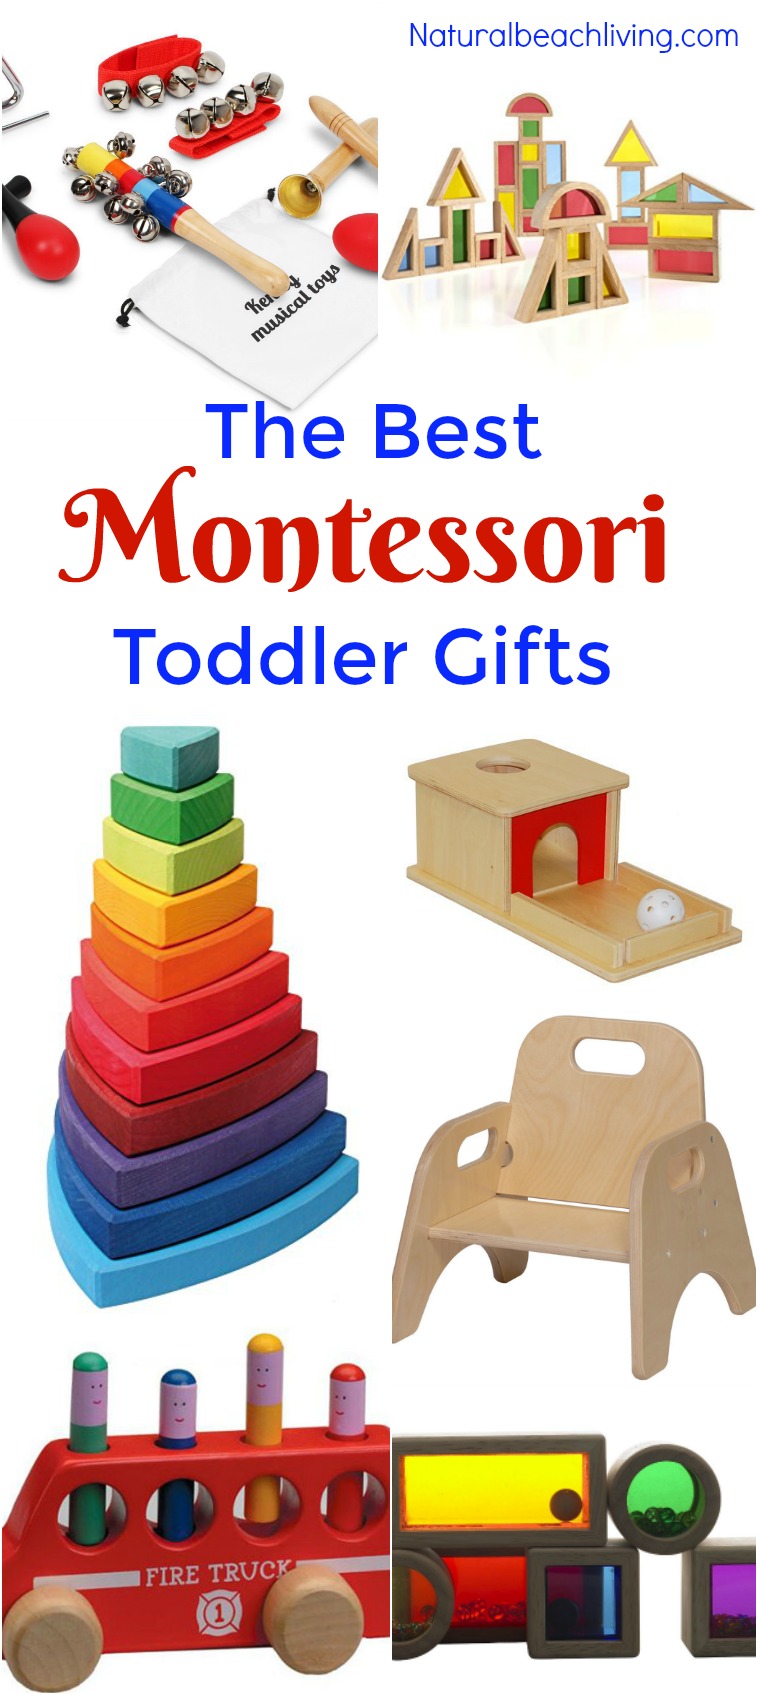 The Best Gifts for a Montessori Toddler